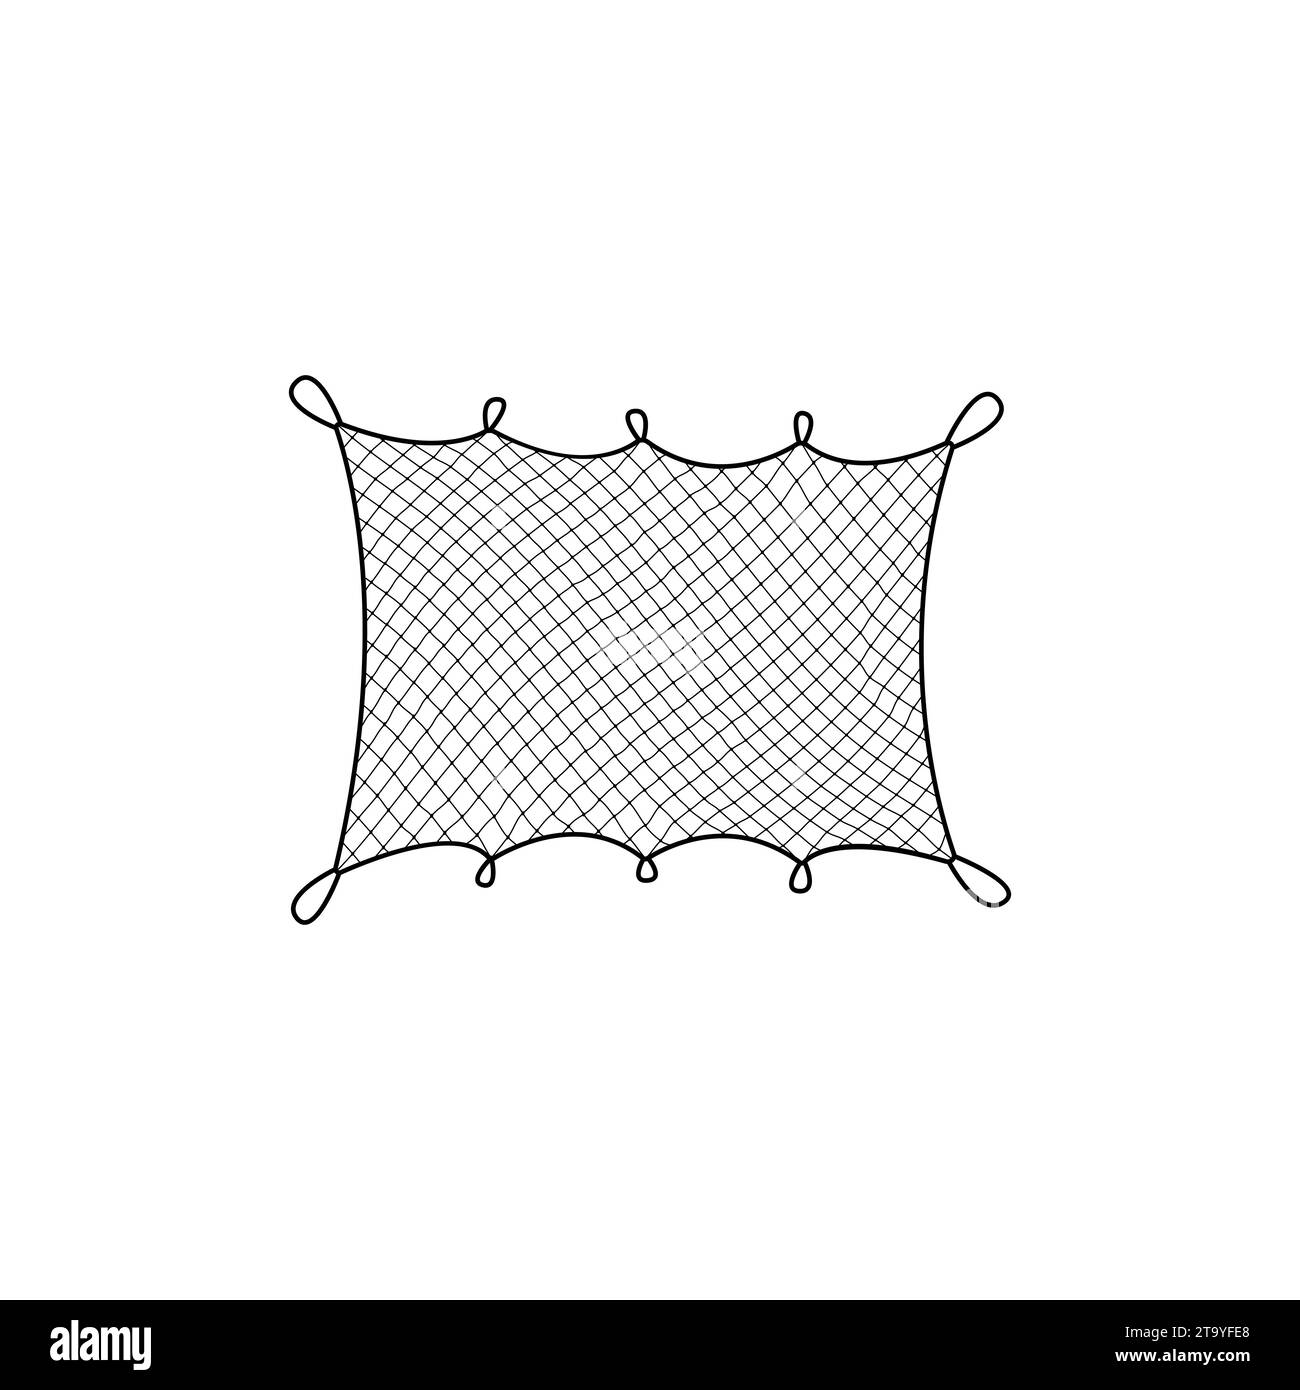 Fishnet Stock Vector Images - Alamy